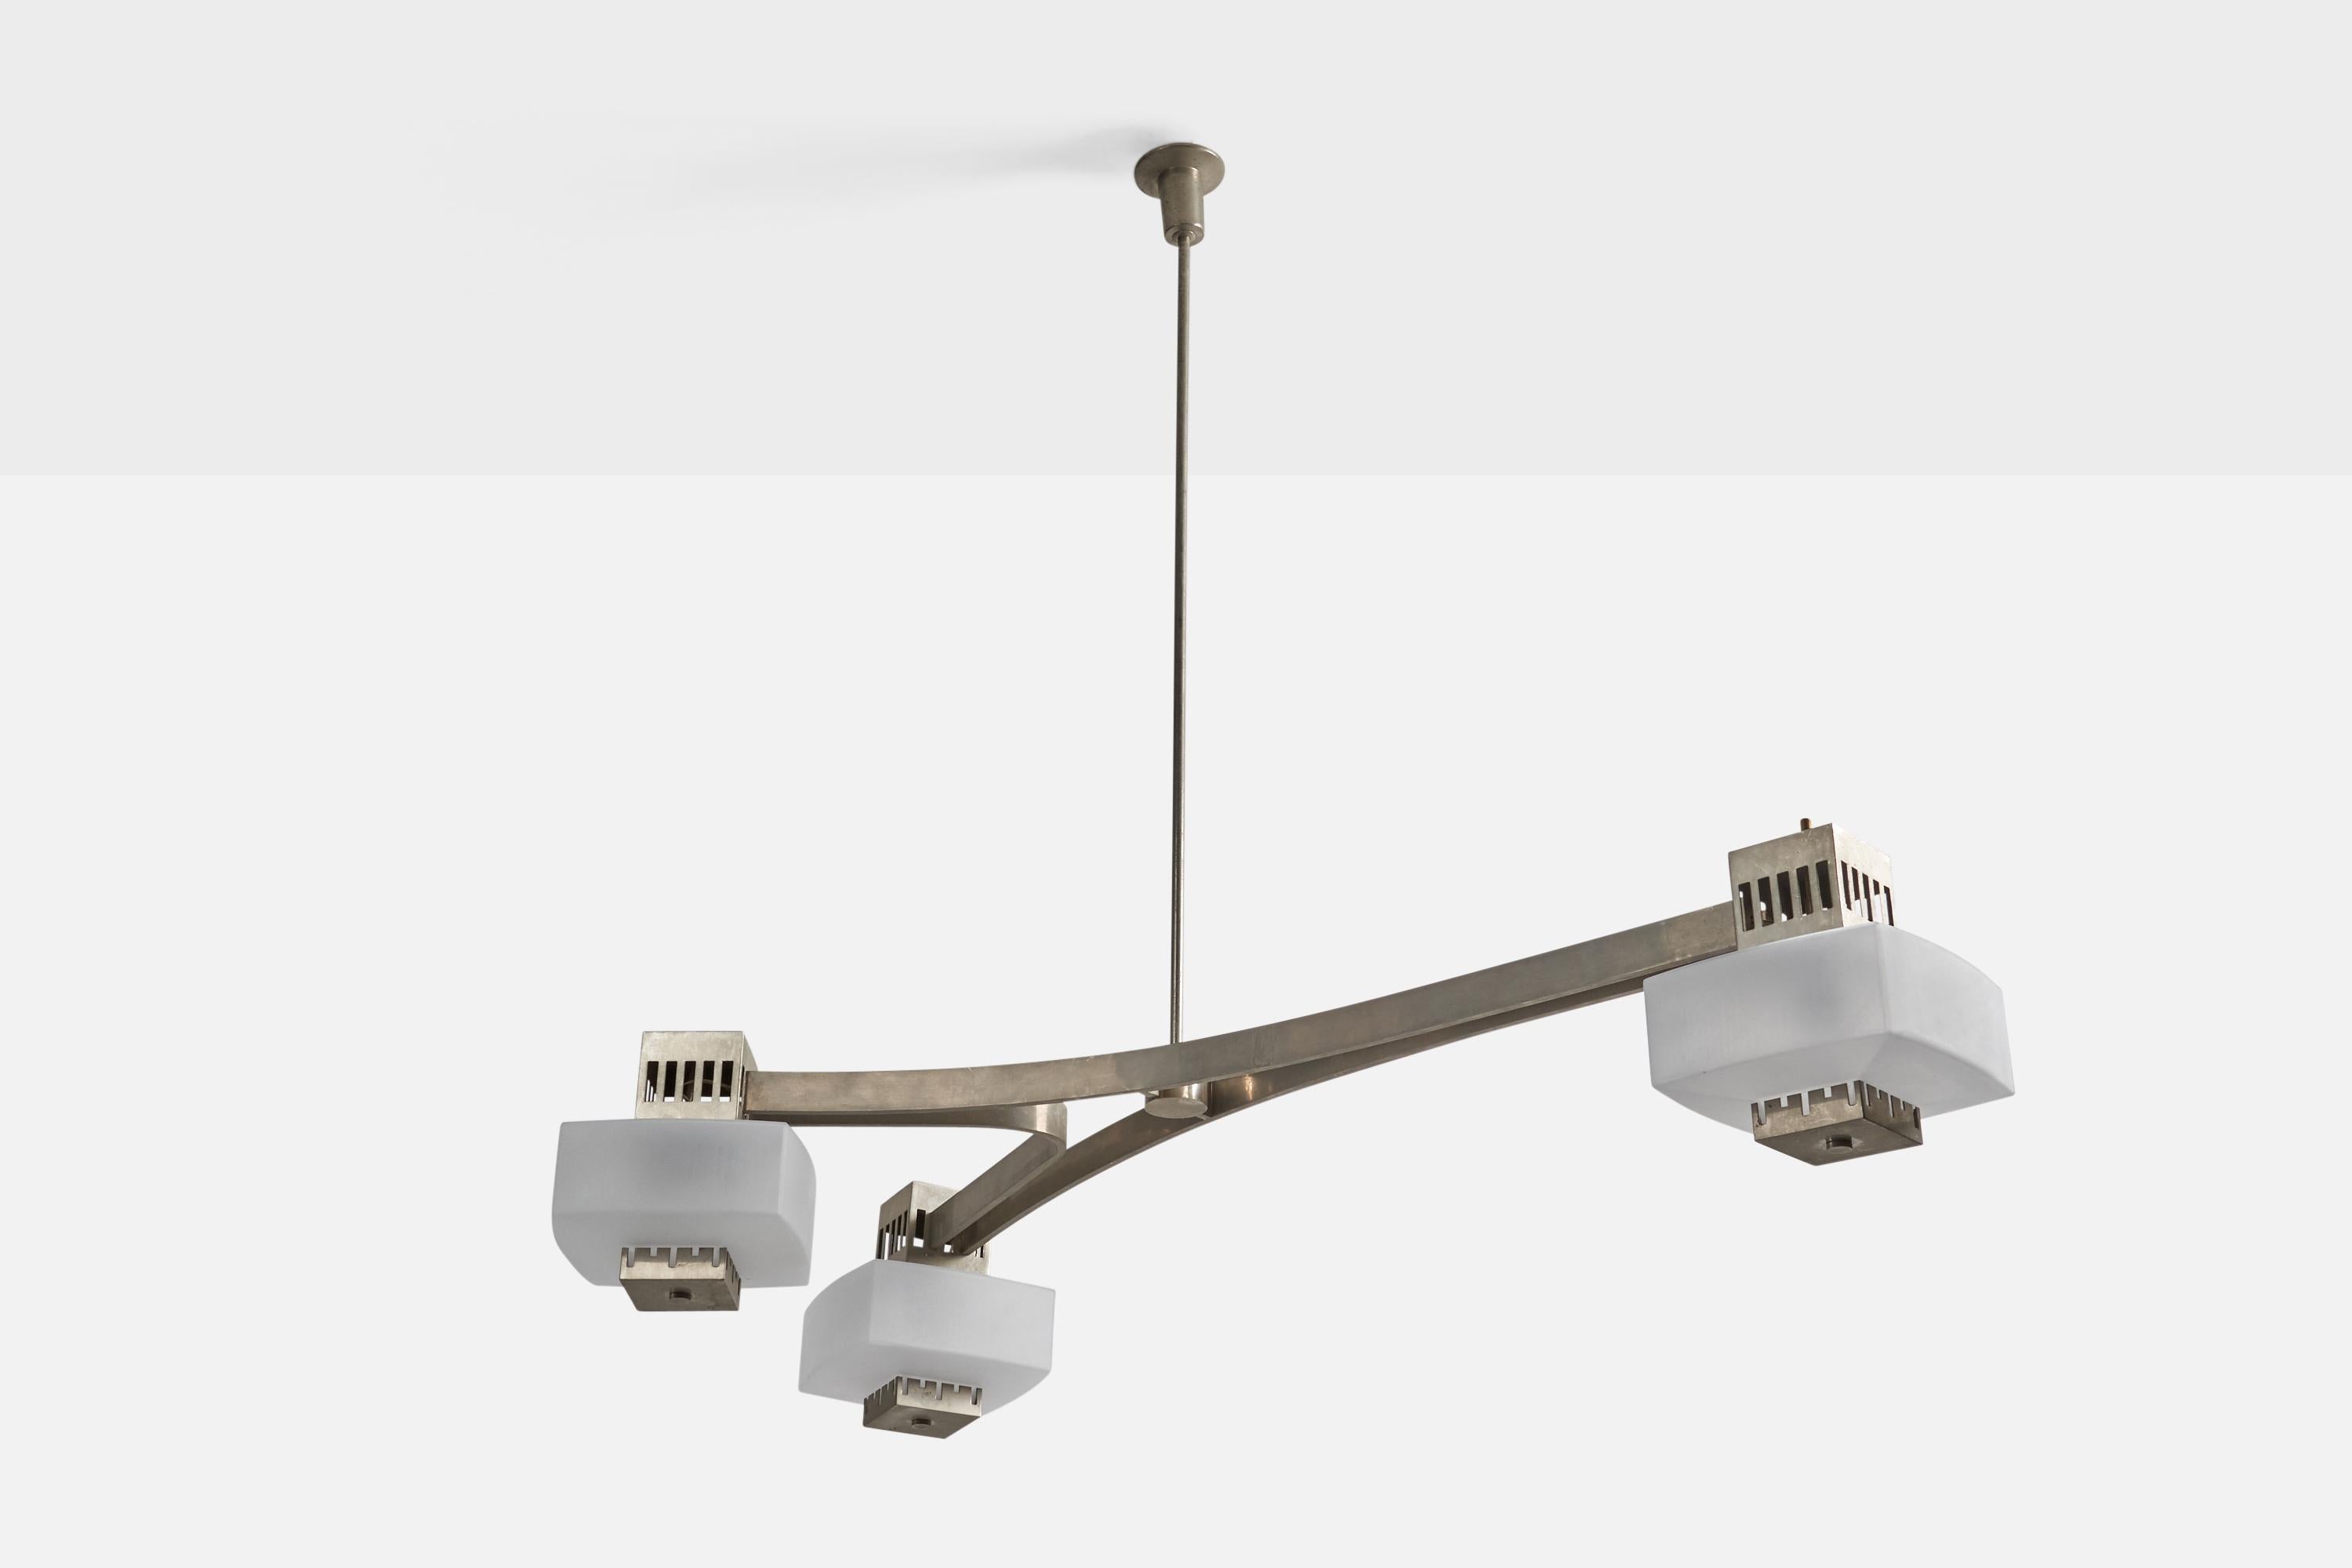 A nickel-plated brass and acrylic chandelier, designed by Elio Monesi and produced by Arredoluce, Italy, c. 1960.

Dimensions of Canopy (inches) : 3.56 x 3.96 x 3.96 (Height x Width x Depth)

Sockets take standard E-26 medium base